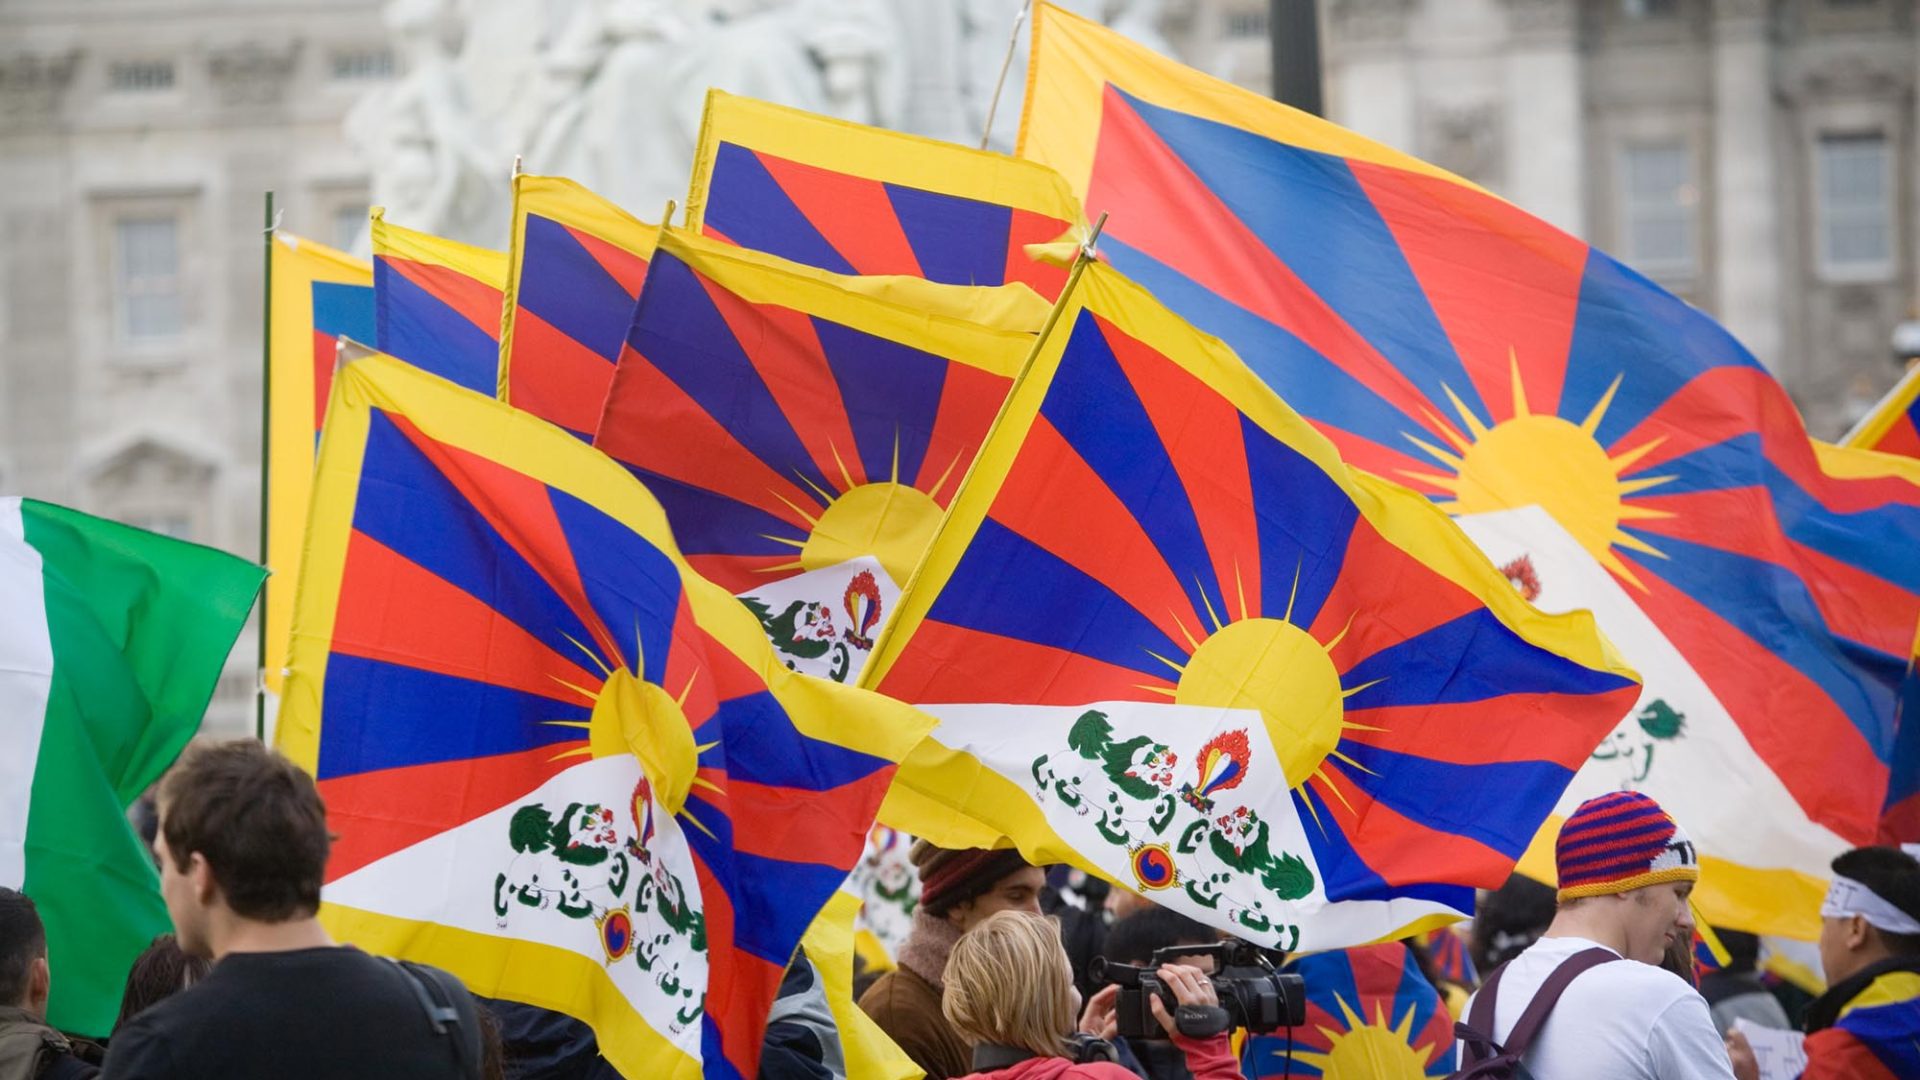 Freedom for Tibet - About Tibet - Free Tibet